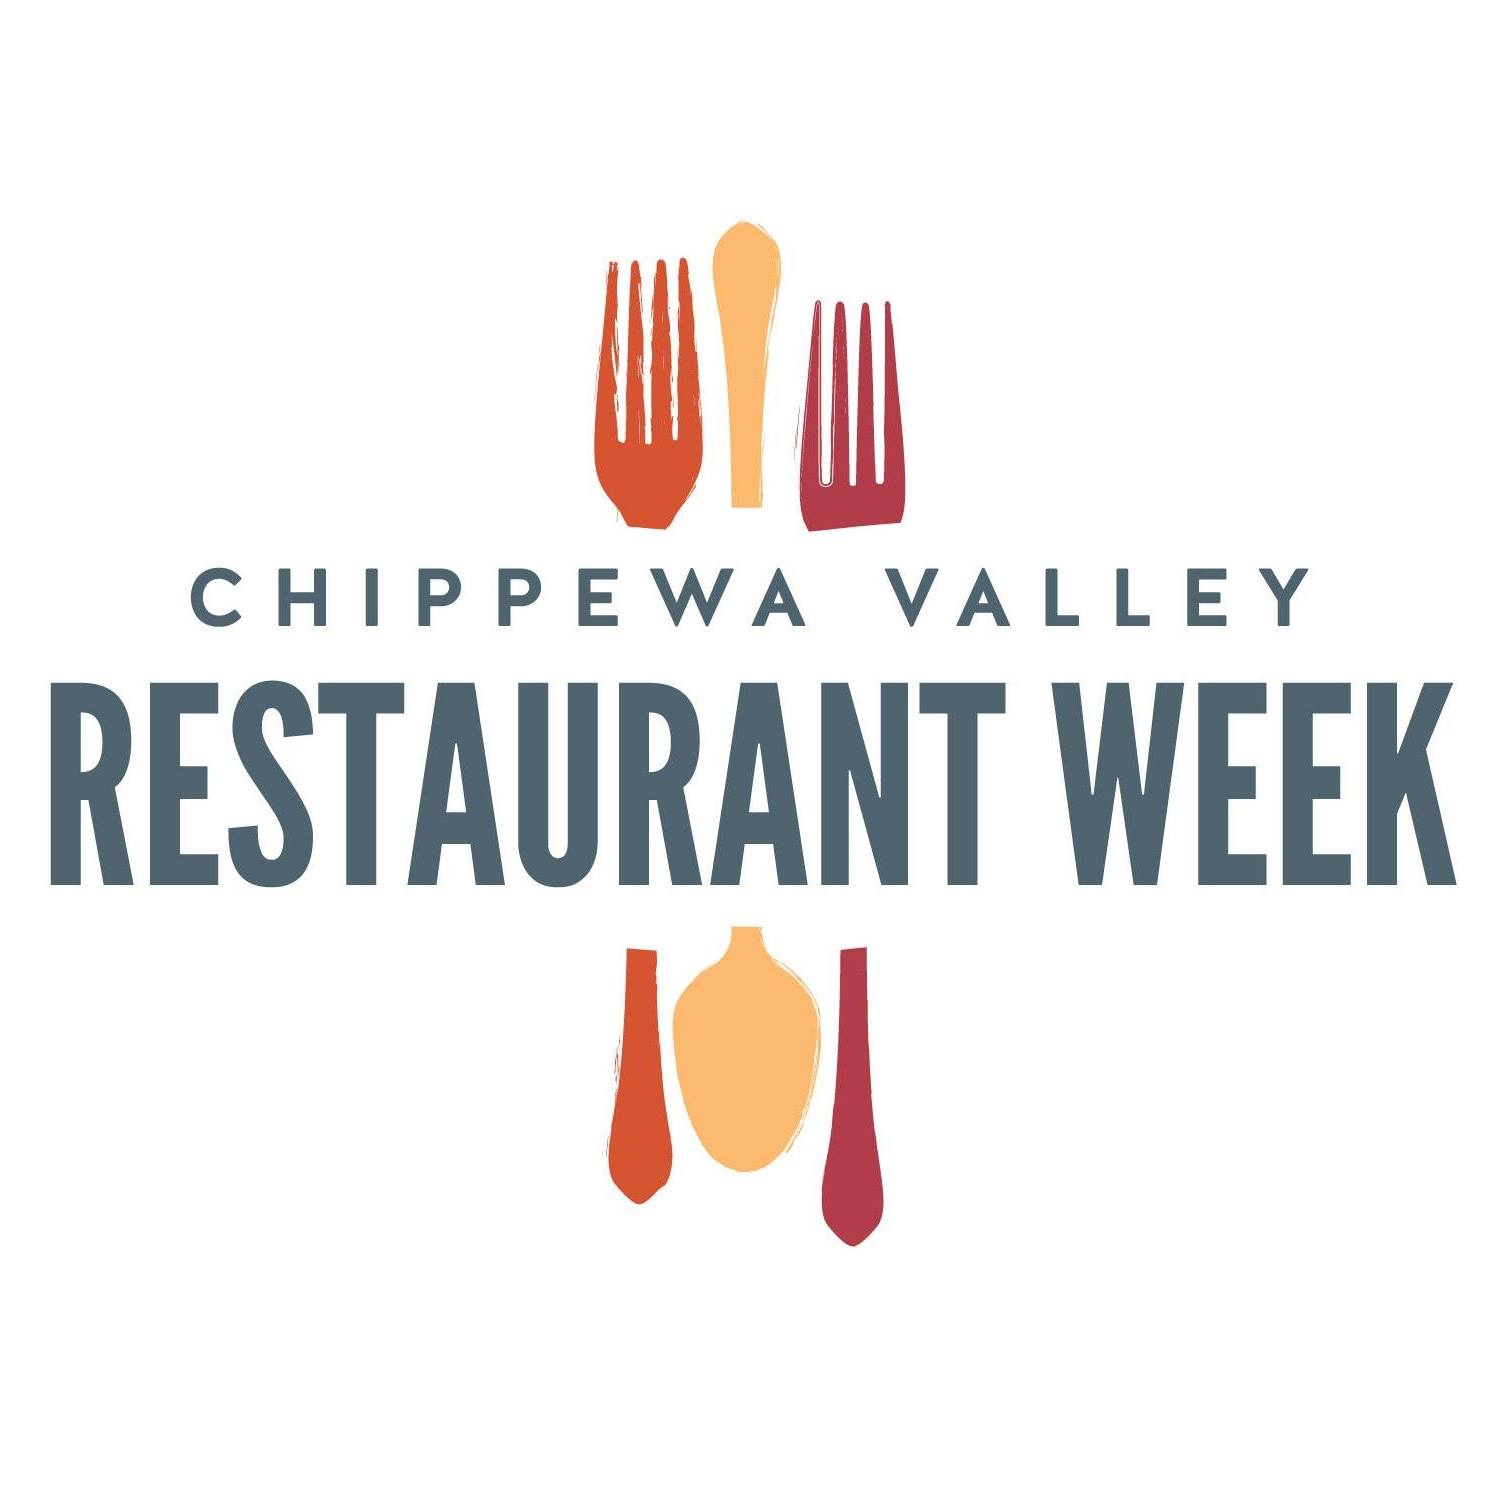 Chippewa Valley Restaurant Week 2019 - The Oxbow Hotel